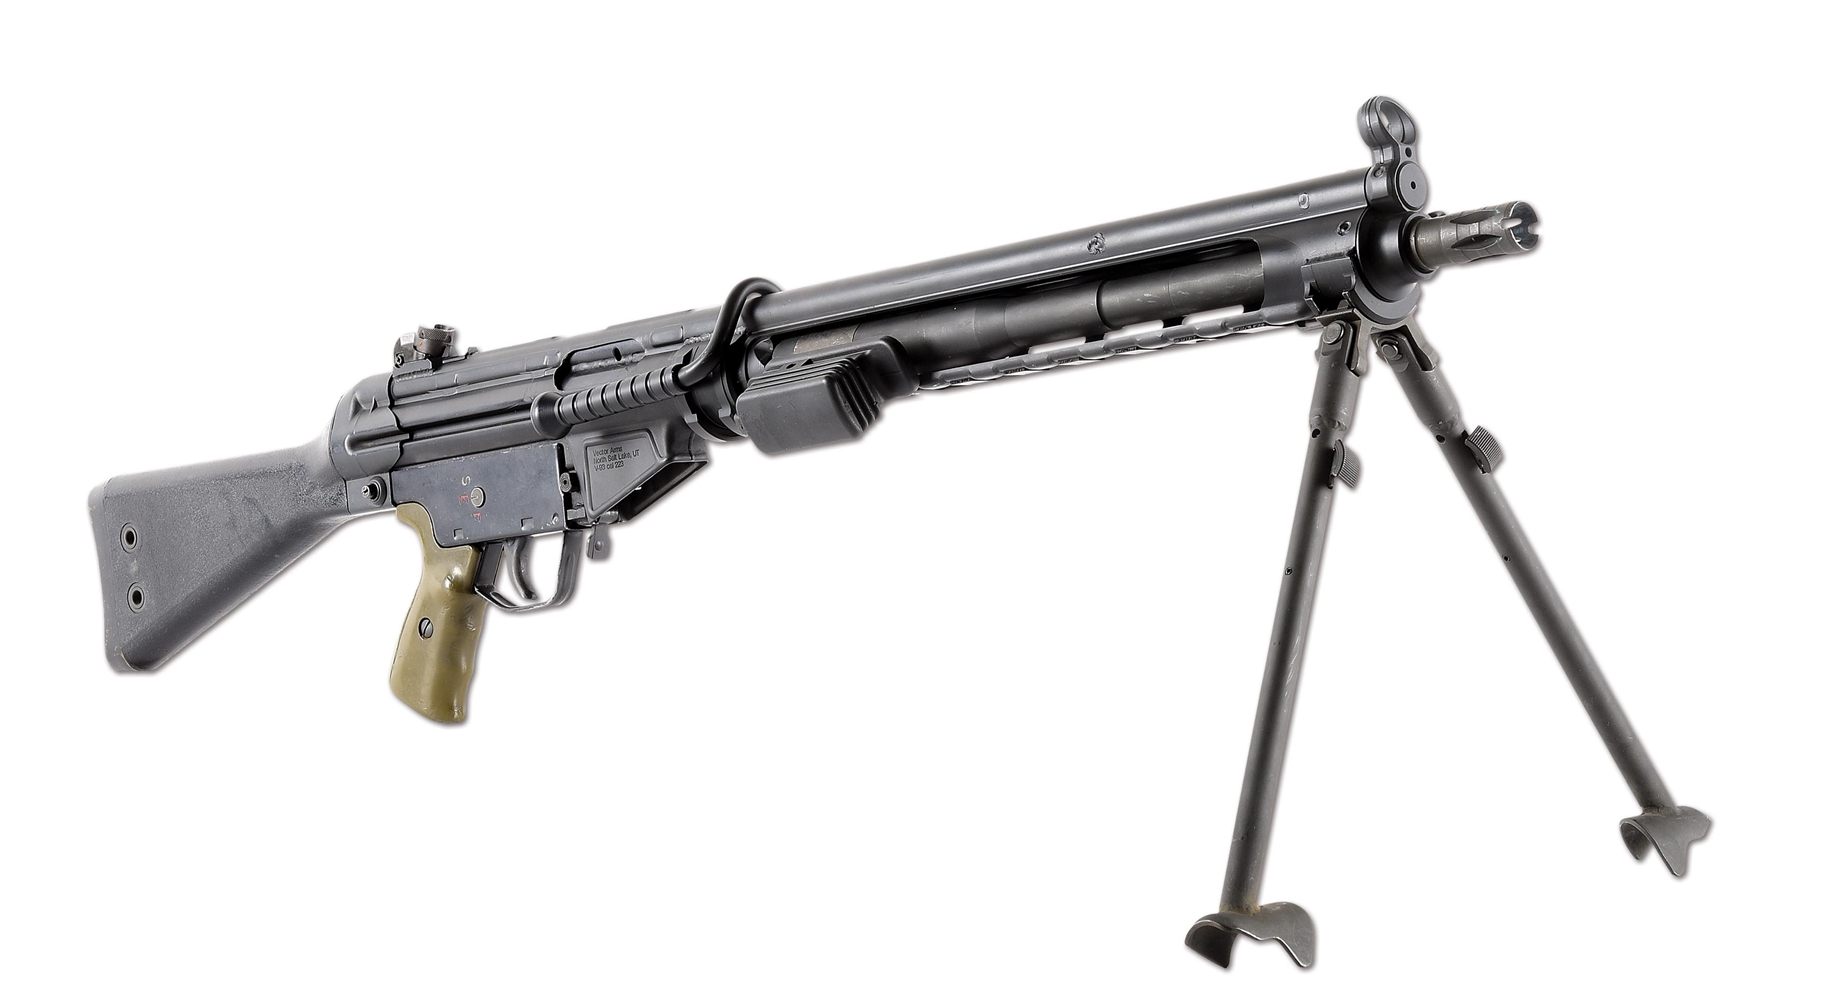 (N) HIGHLY DESIRABLE AND EXTREMELY POPULAR FLEMING REGISTERED H&K MACHINE GUN SEAR PACK WITH TWO POPULAR HOST GUNS (FULLY TRANSFERABLE). 